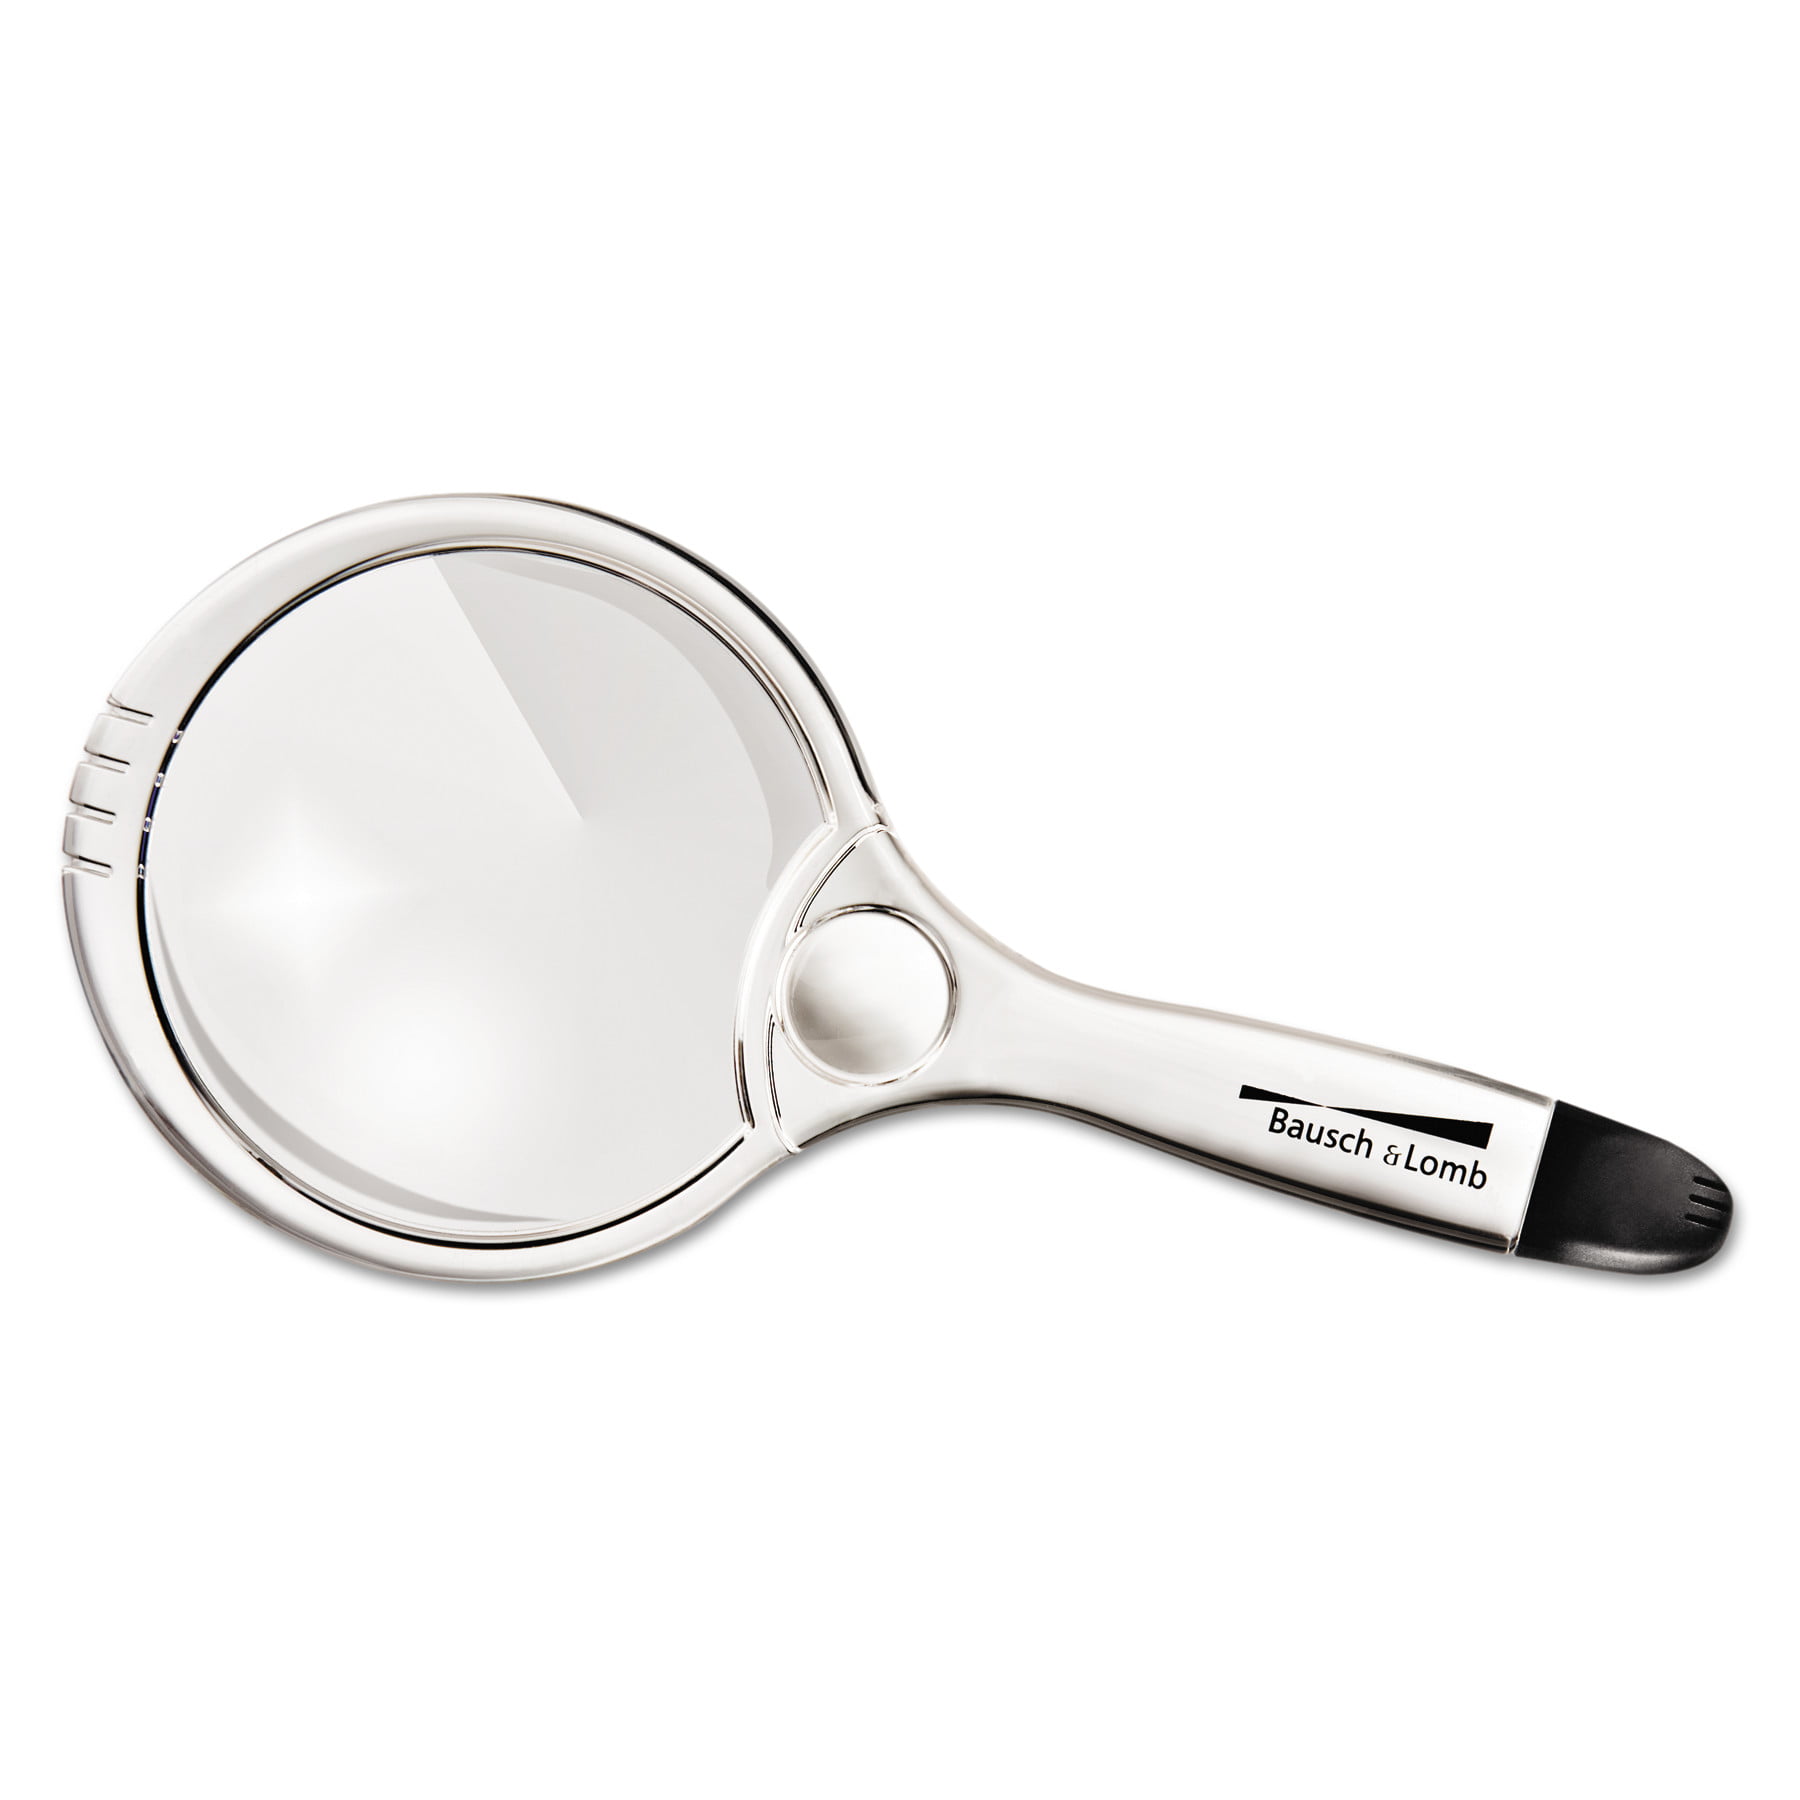 Bausch and Lomb 2x Rectangular Magnifier Bausch and Lomb Magnifying Lens  Size: 5 inches - My Vision Aid, Inc.